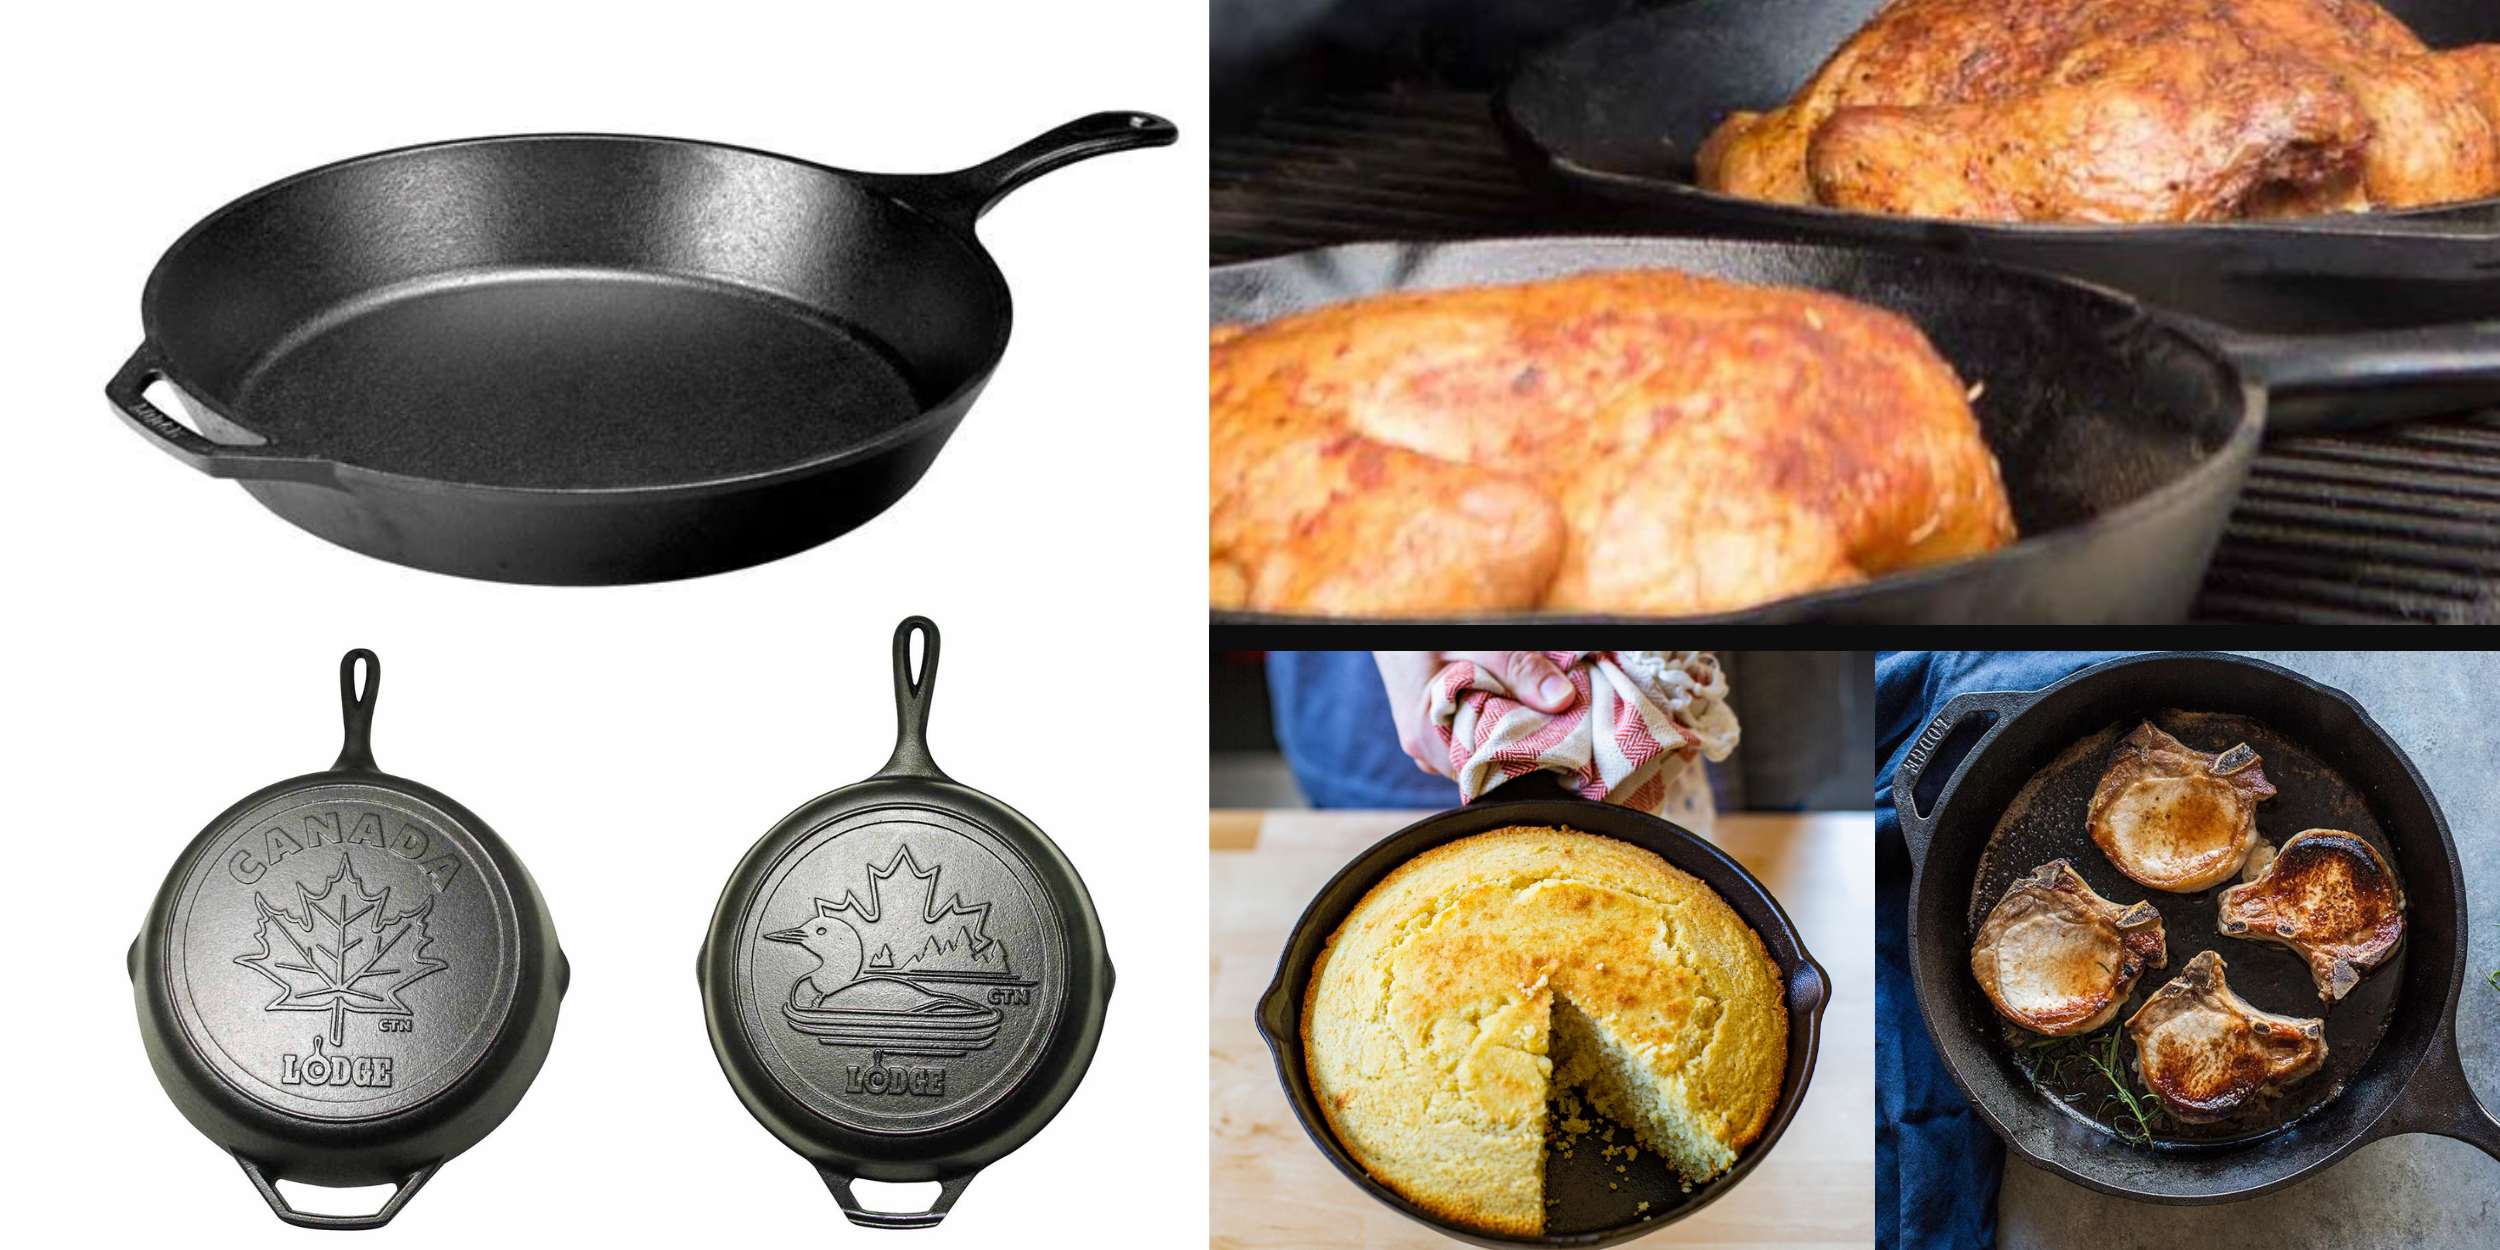 Selection of Lodge skillets and uses